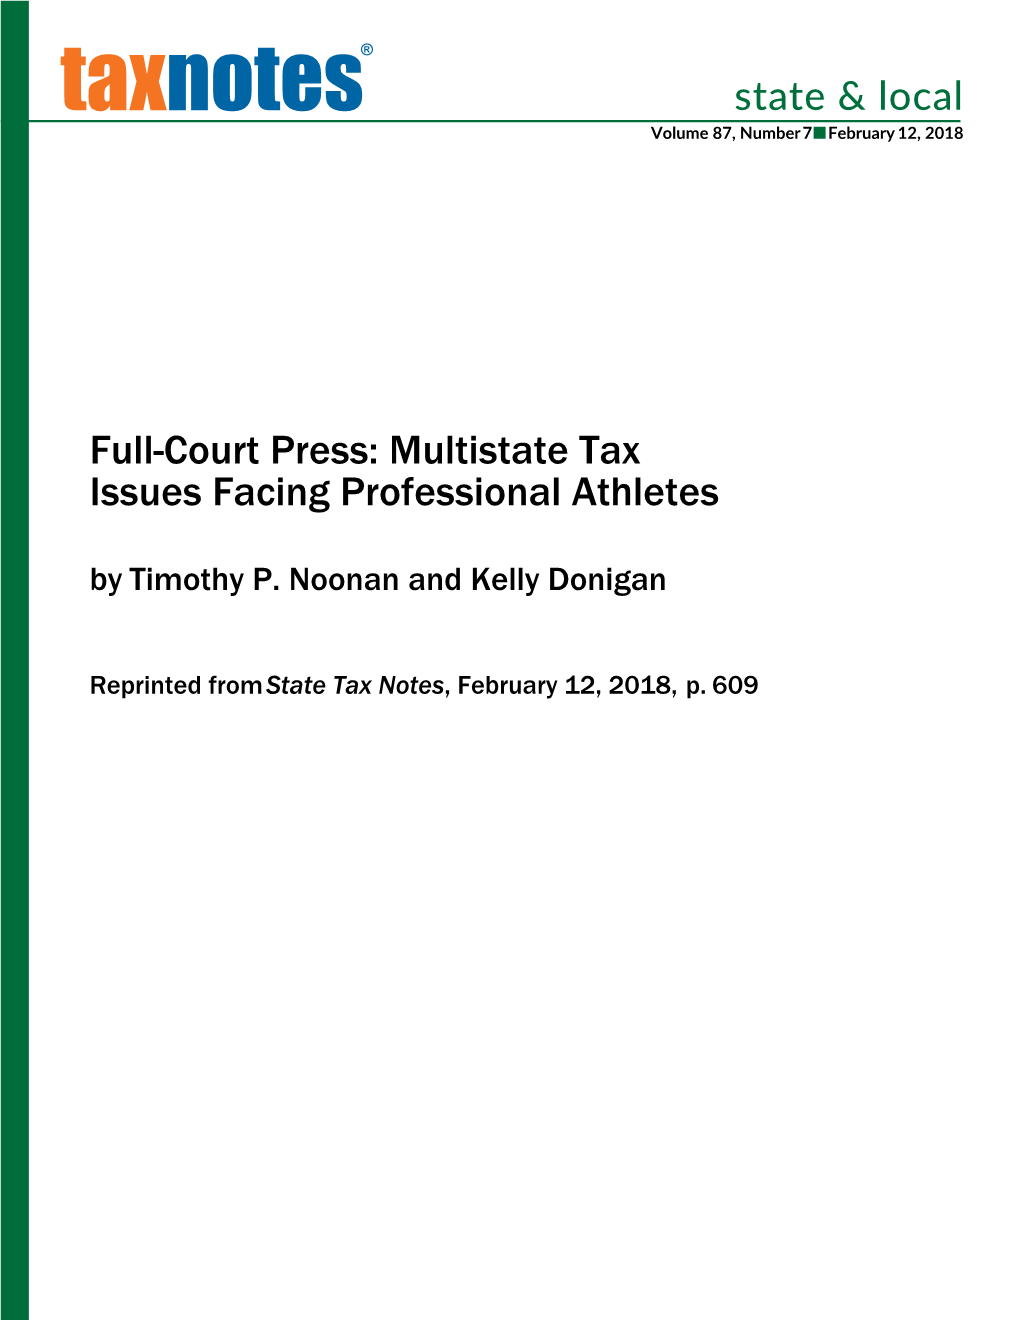 Multistate Tax Issues Facing Professional Athletes by Timothy P